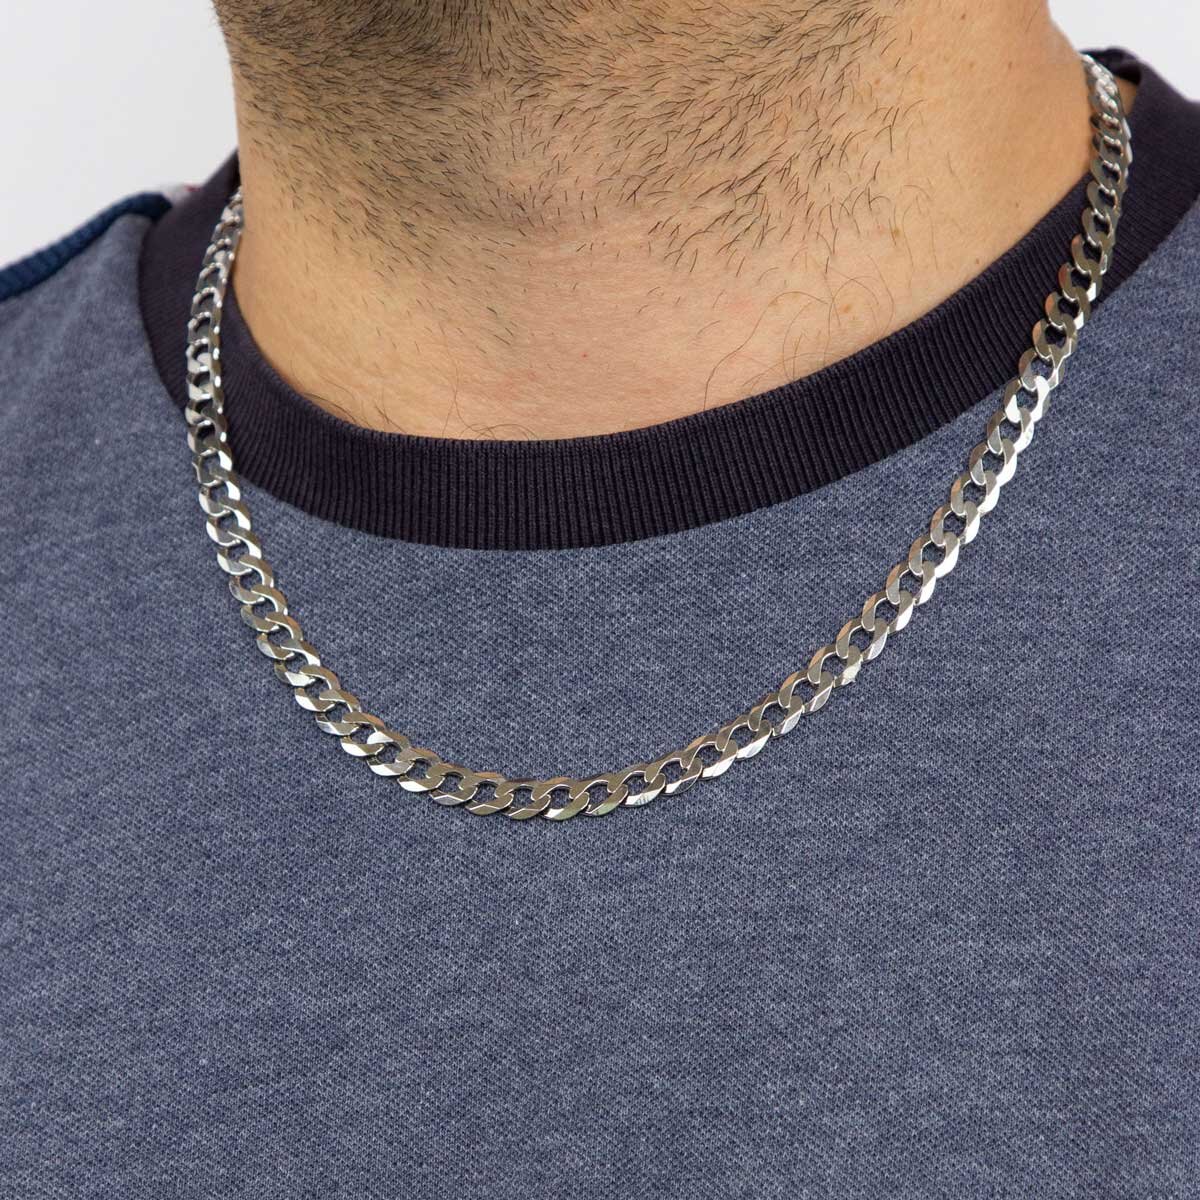 Fred Bennett Sterling Silver Heavyweight Diamond Cut Curb Chain Necklace